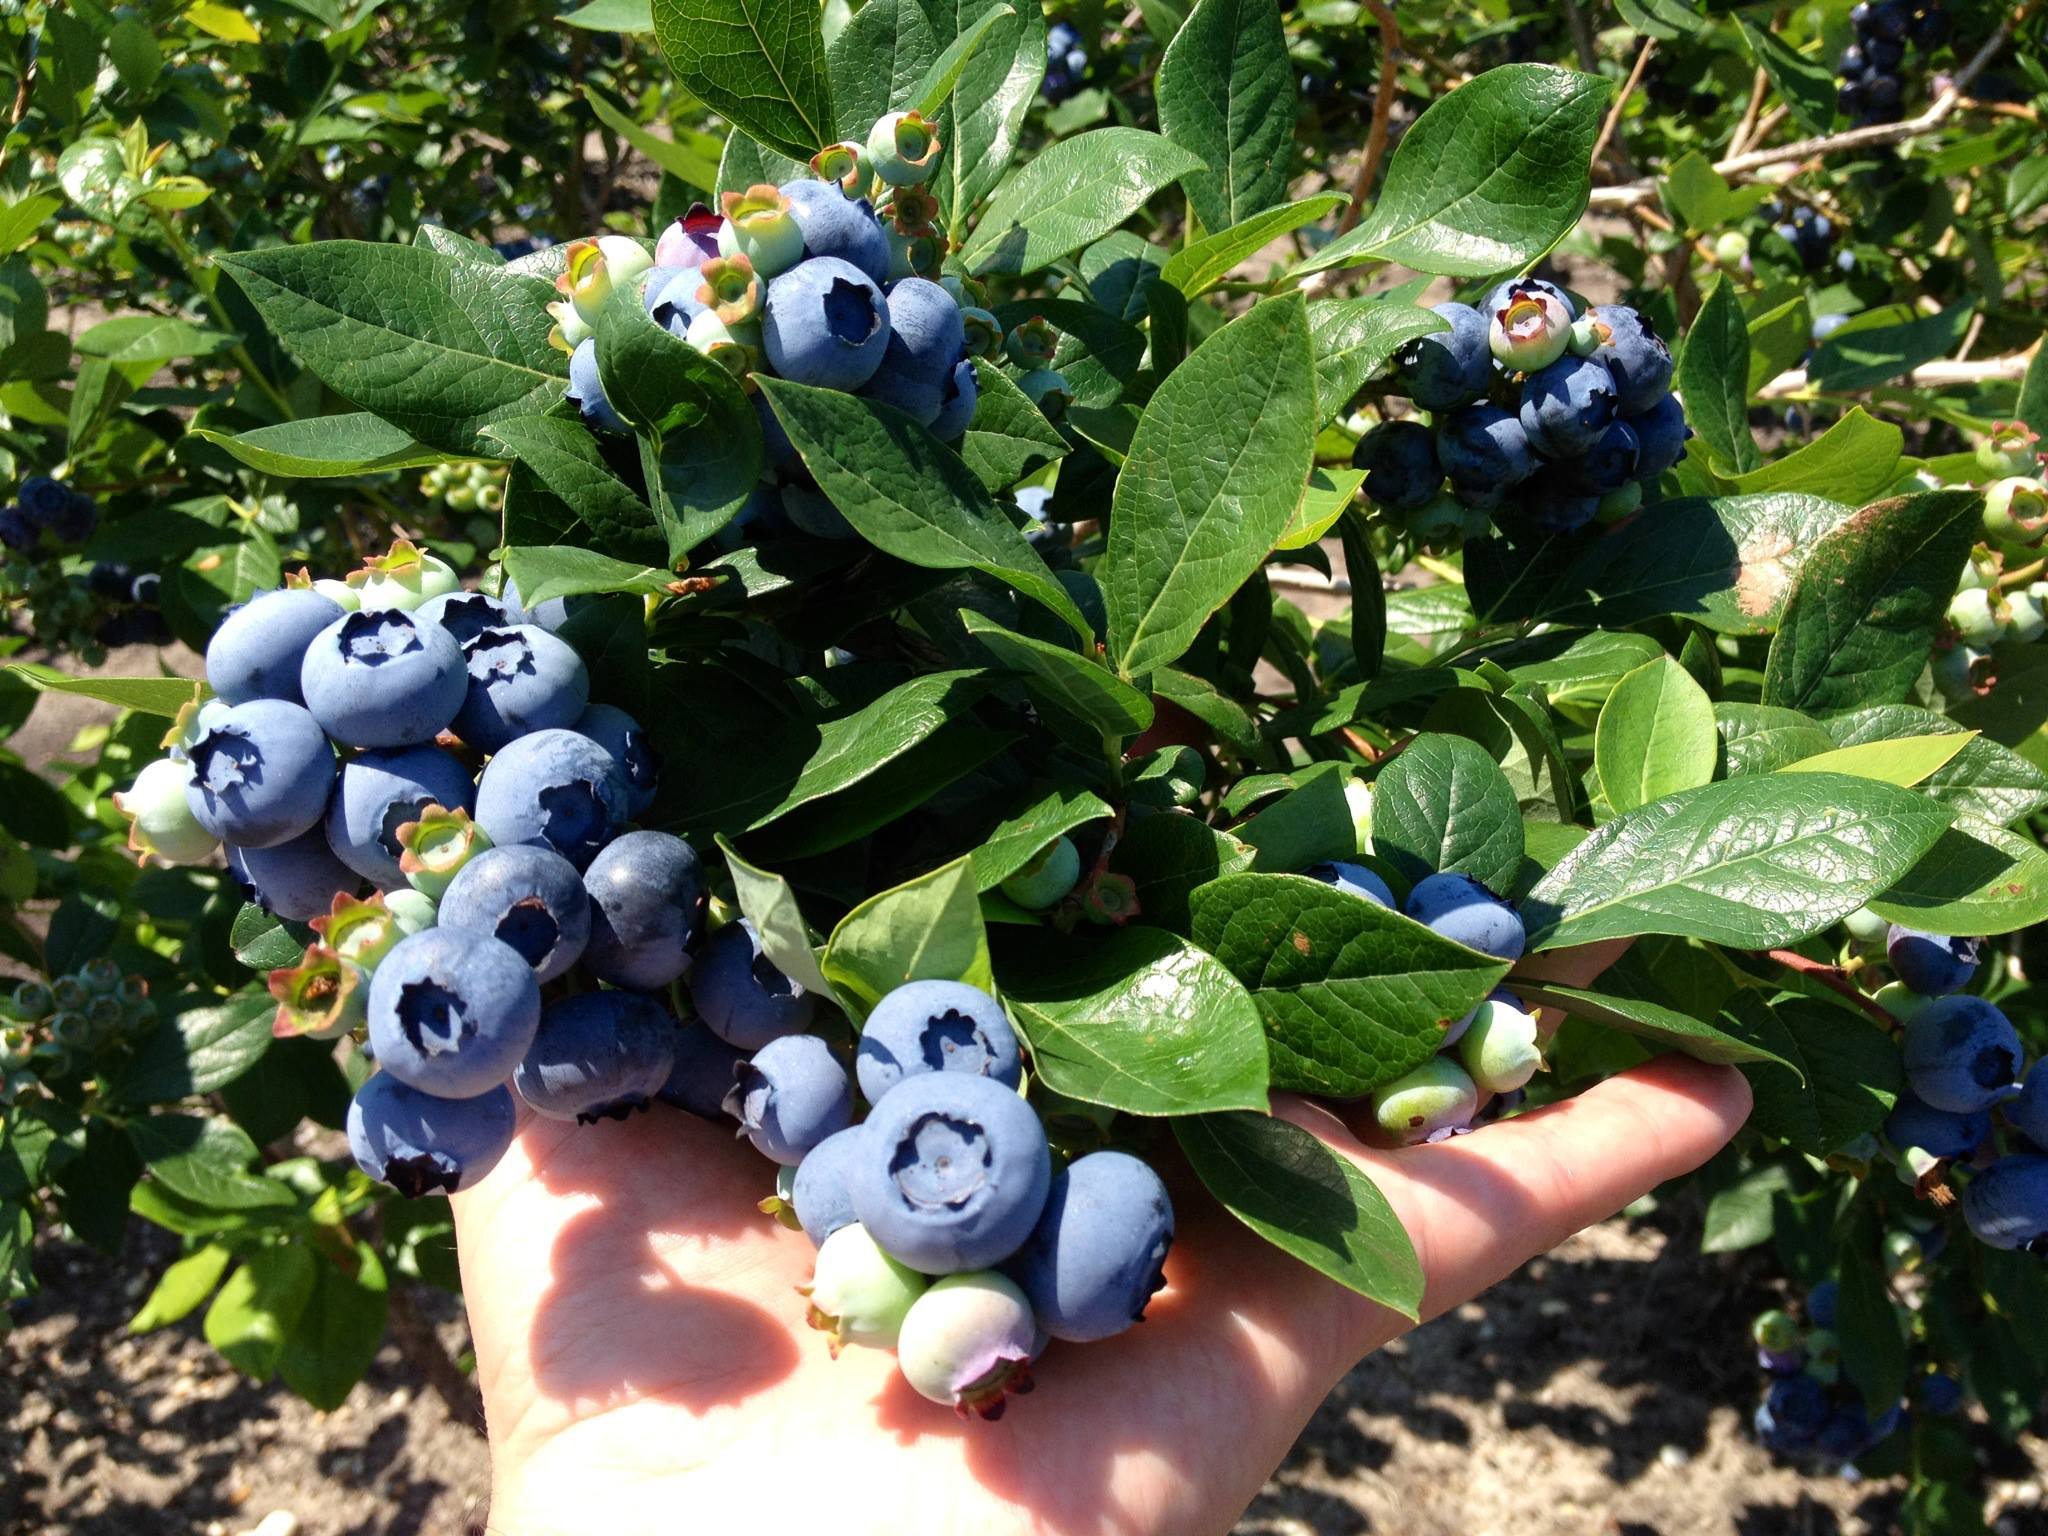 Blueberry Plants and Bushes for Sale - DiMeo NJ Blueberries Farms.jpg